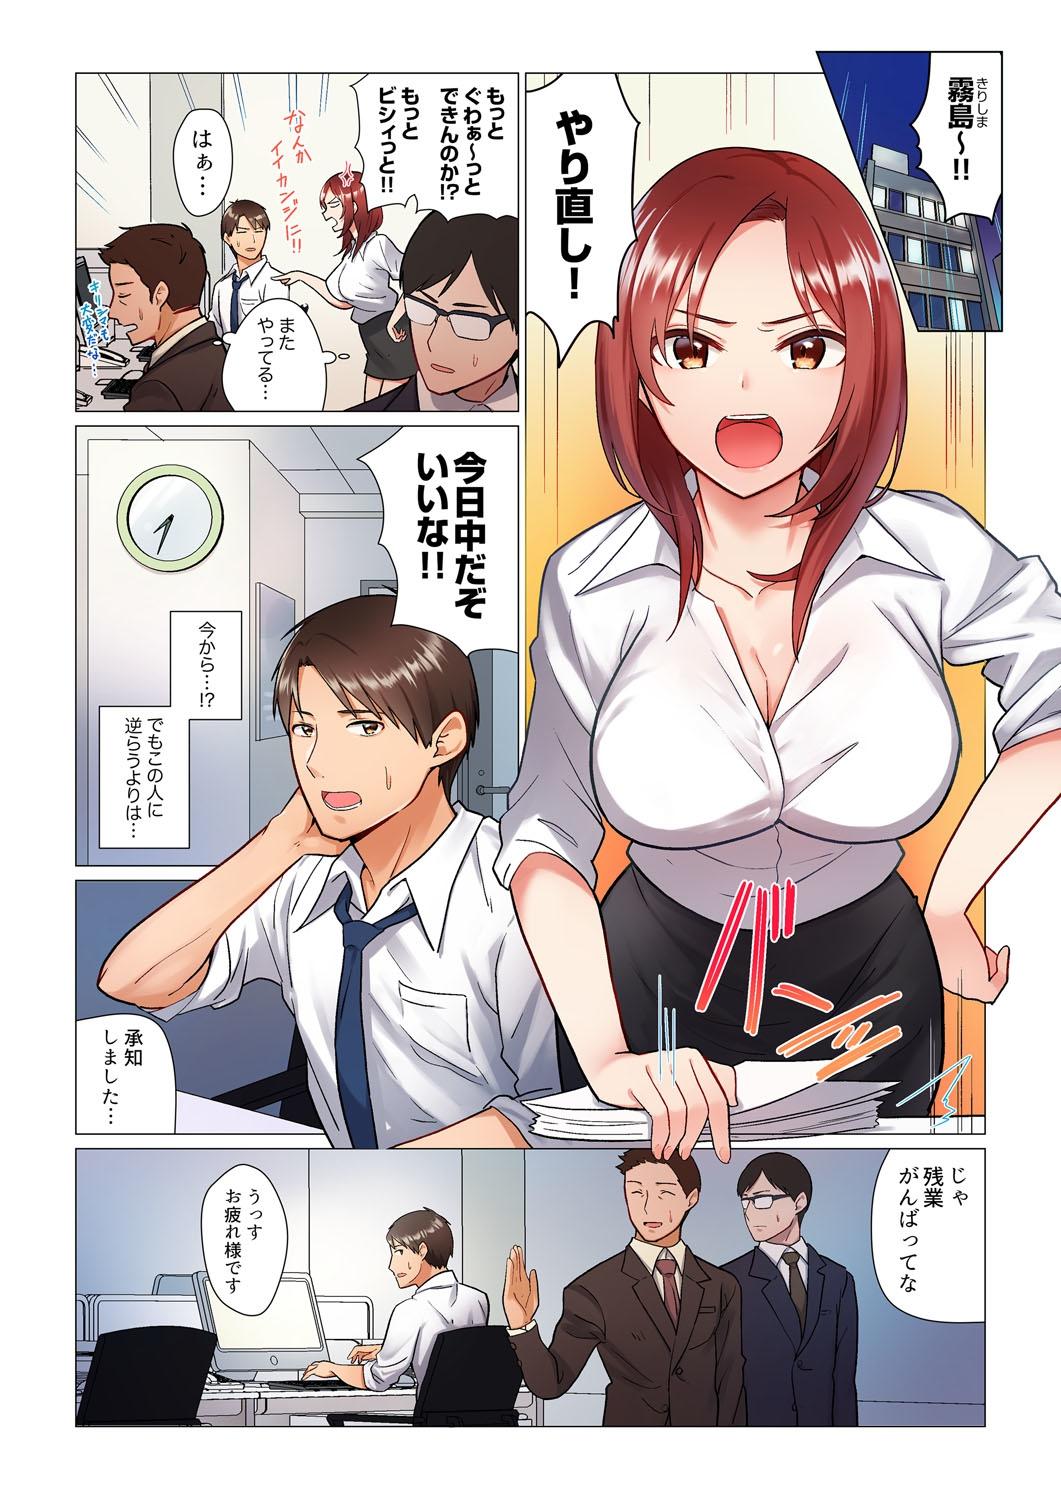 Aussie 居眠り中の女上司にこっそり挿入（※寝たフリしながらイッてました）1-10 Pick Up - Page 3